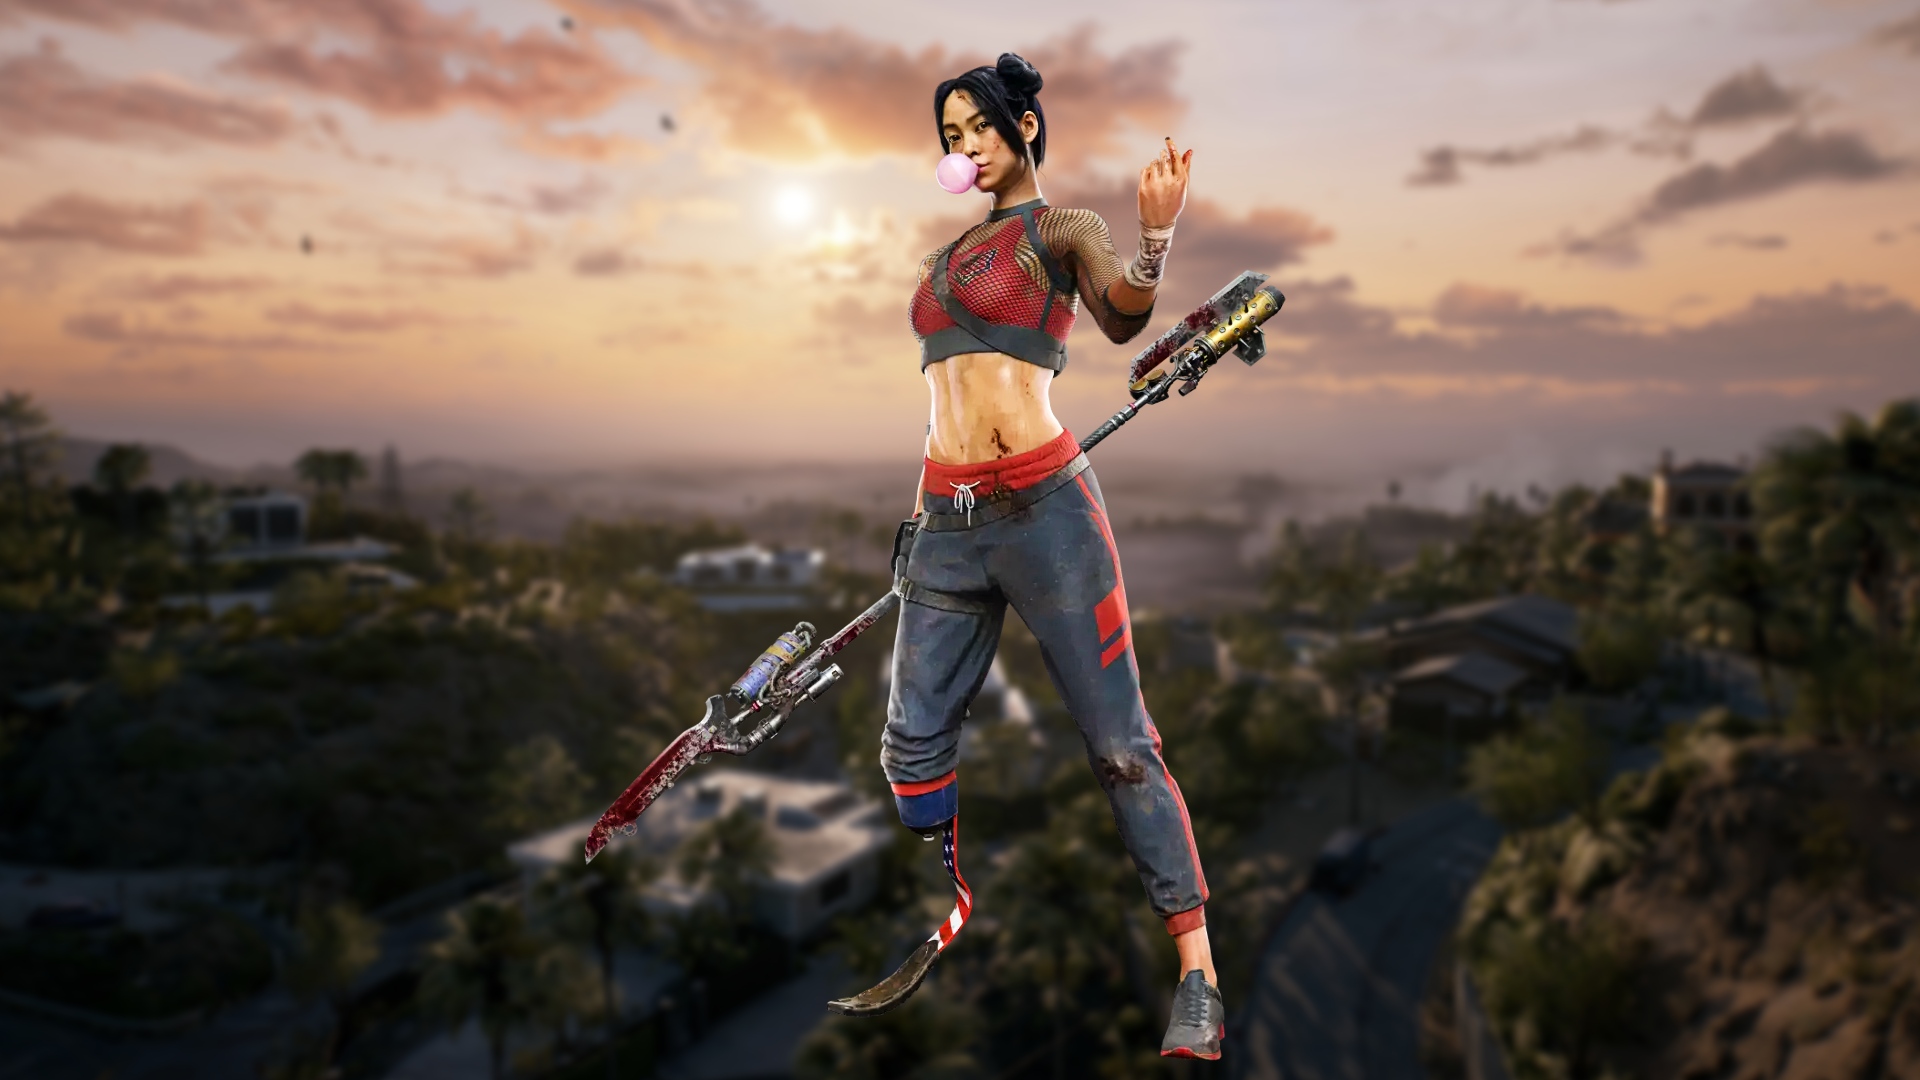 Dead Island 2 interview, gameplay and weapons revealed